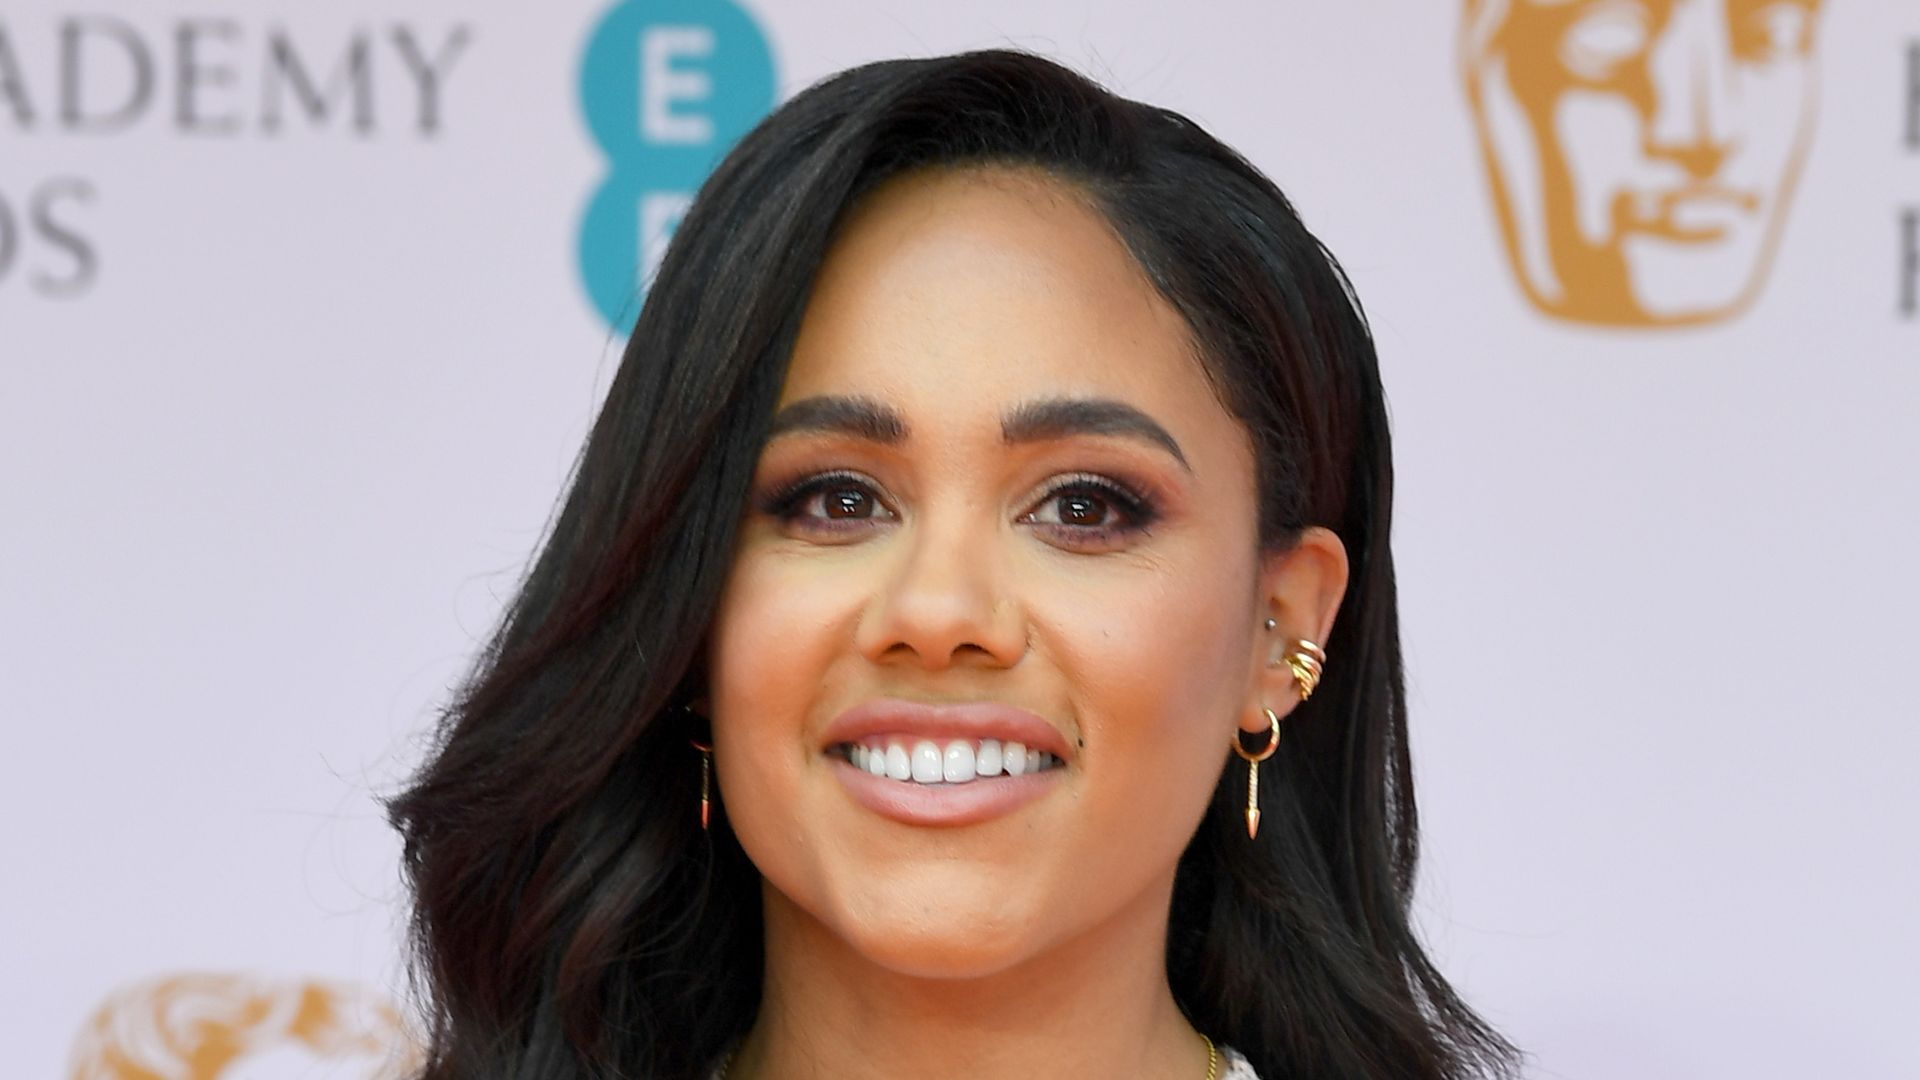 Alex Scott shows off washboard abs in new photos from Mexico holiday with Jess Glynne